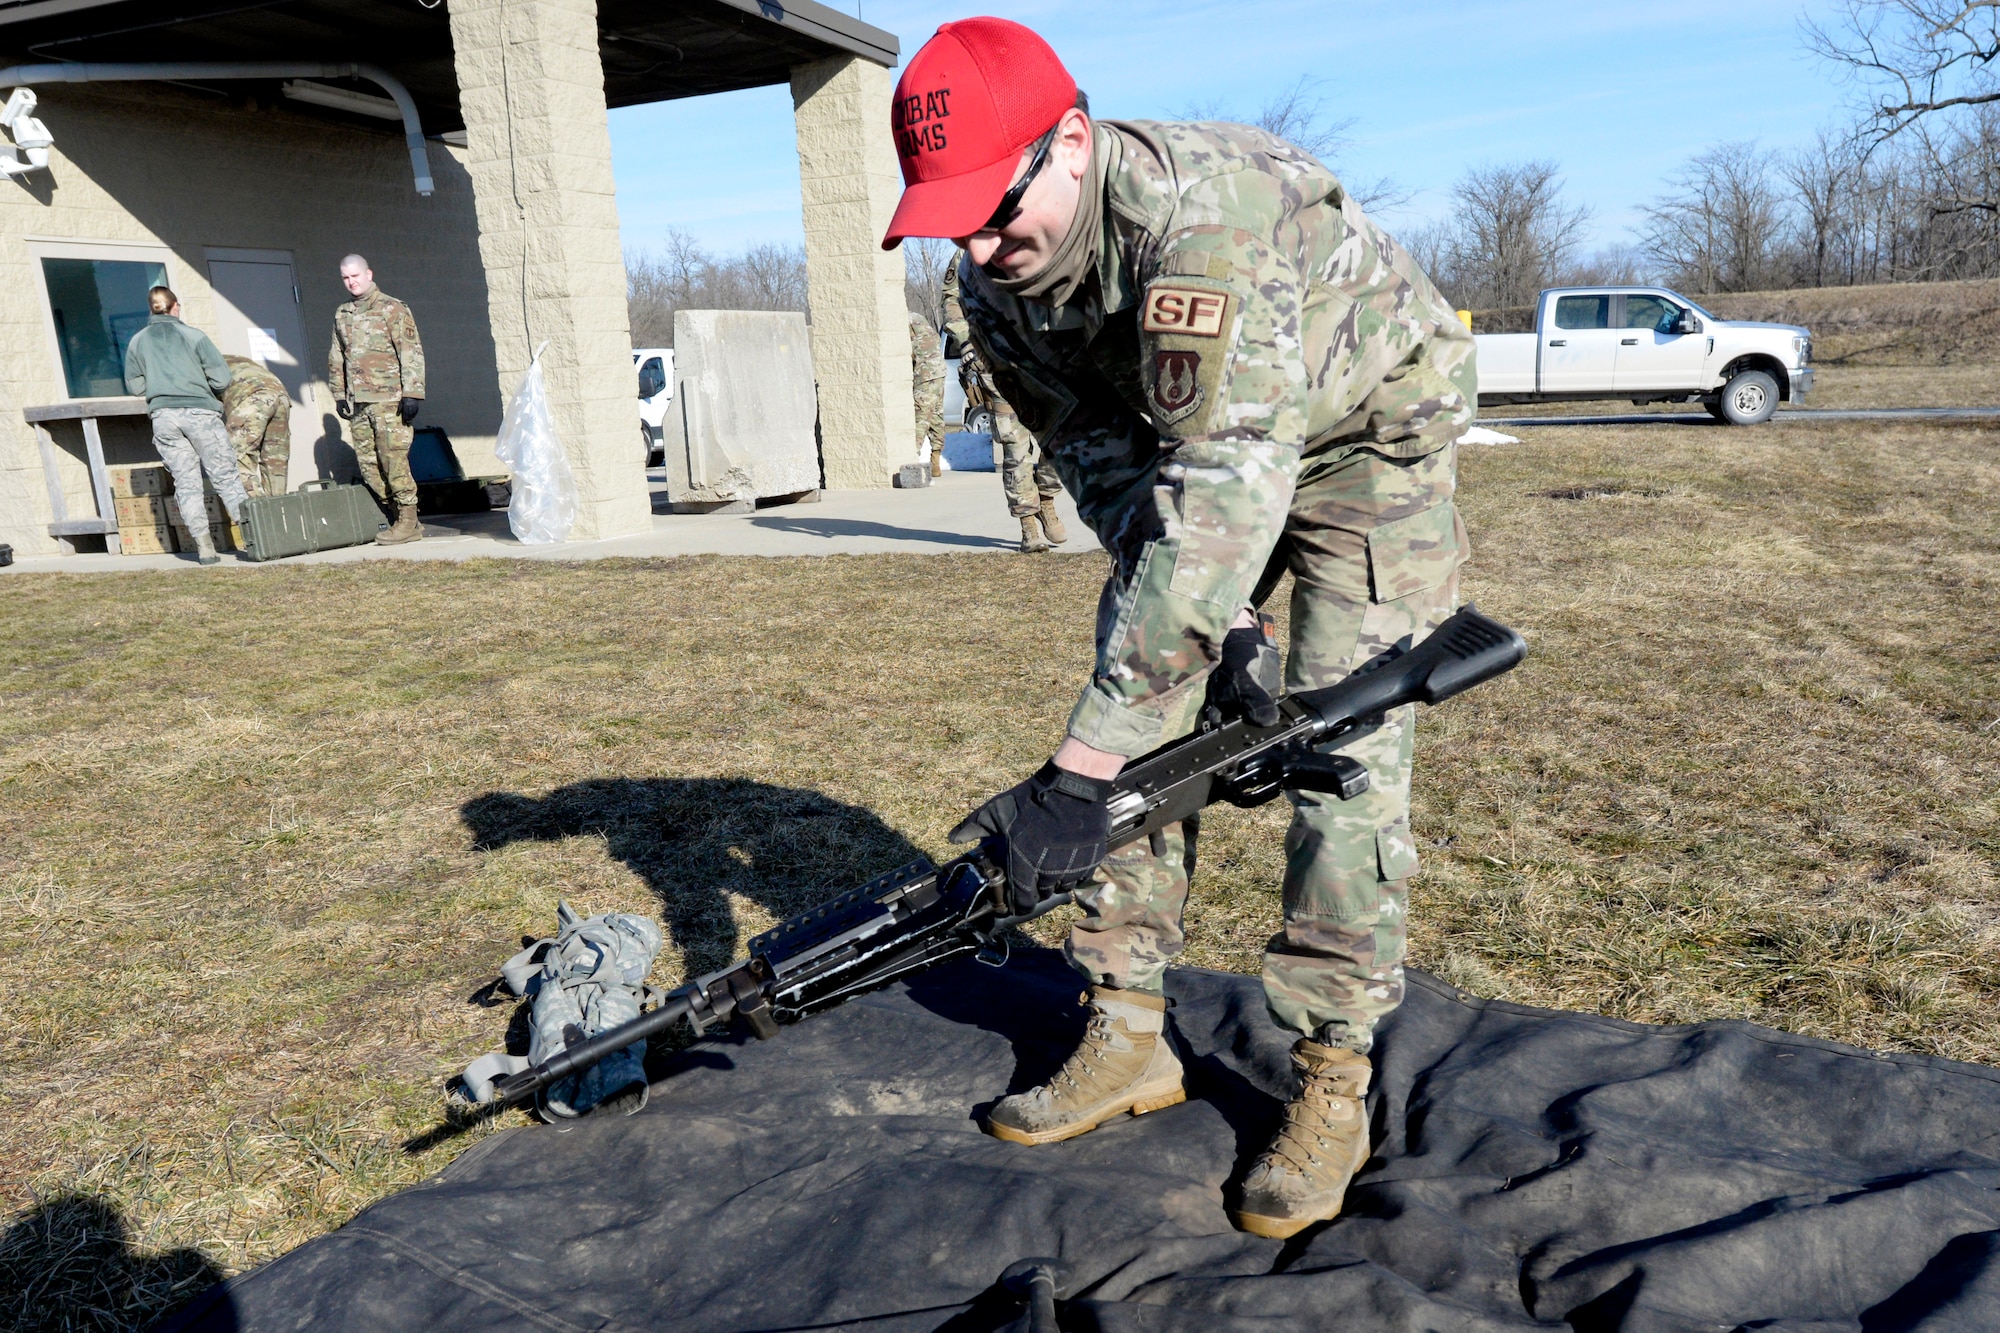 Air Force Staff Sgt. Sawyer McIntyre, an 88th Security Forces Squadron combat arms instructor, carries an M240B machine gun to a shooting range at Camp Atterbury in Edinburgh, Indiana, on Feb. 25, 2021. The 88th SFS combat arms instructors, from Wright-Patterson Air Force Base, Ohio, travel to Camp Atterbury multiple times each year for readiness and qualification training with deployers on machine guns and grenade launchers. (U.S. Air Force photo by Ty Greenlees)